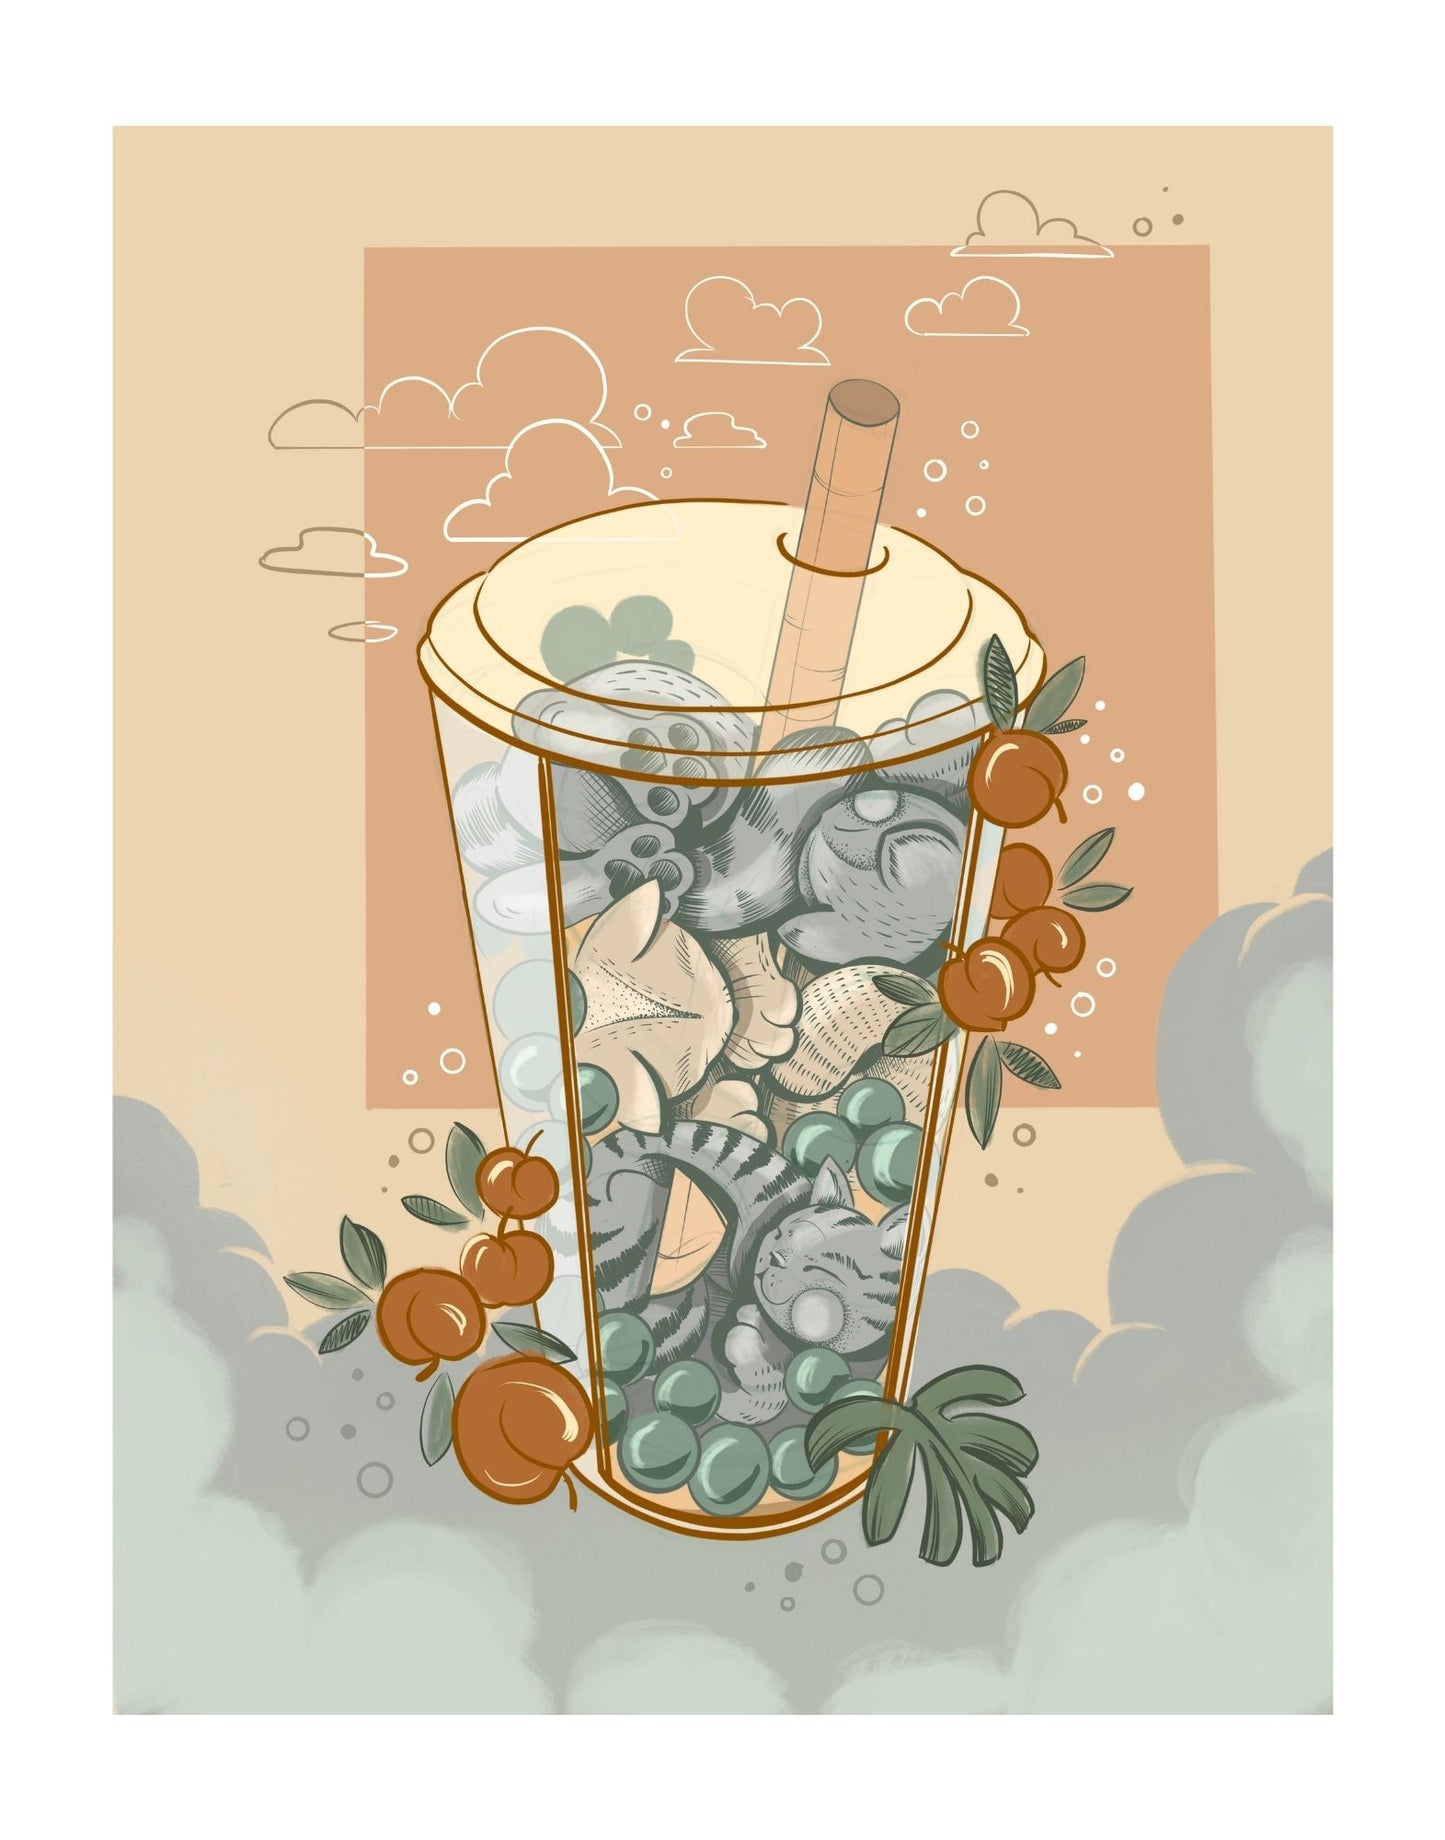 Digital illustration of cats in bubble tea cup, designed by Lu Loram Martin, Toronto, Canada